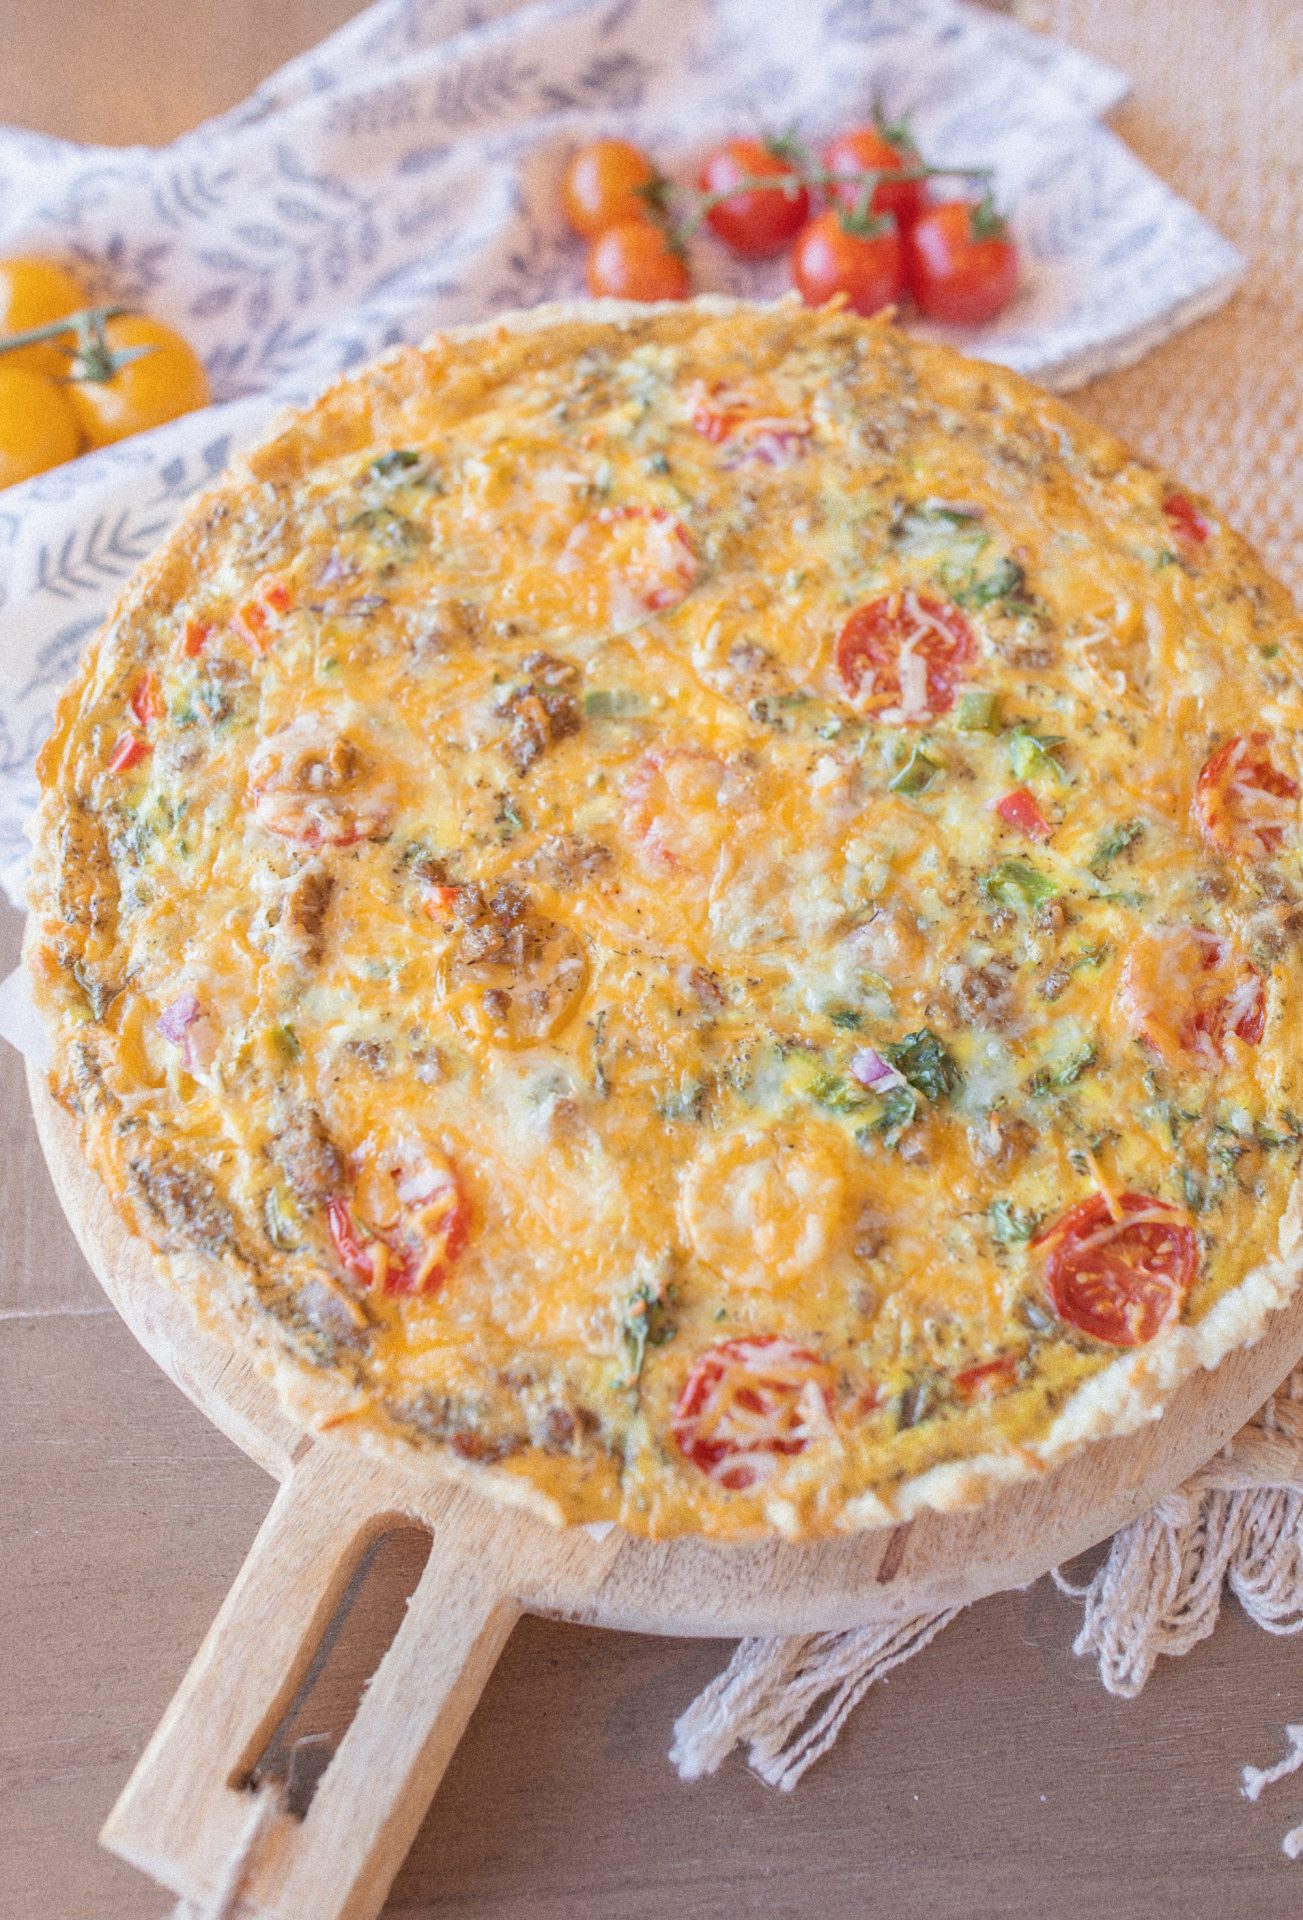 sourdough quiche crust, flaky quiche crust, flaky breakfast pie, breakfast pie, the best quiche recipe, vegetable and sausage quiche, breakfast, lunch, dinner, healthy recipe, sausage quiche, arugula, eating fresh, homemade quiche, the best quiche, fitting in more vegetables, diet recipes, healthy and fresh, farm to table, healthy recipes